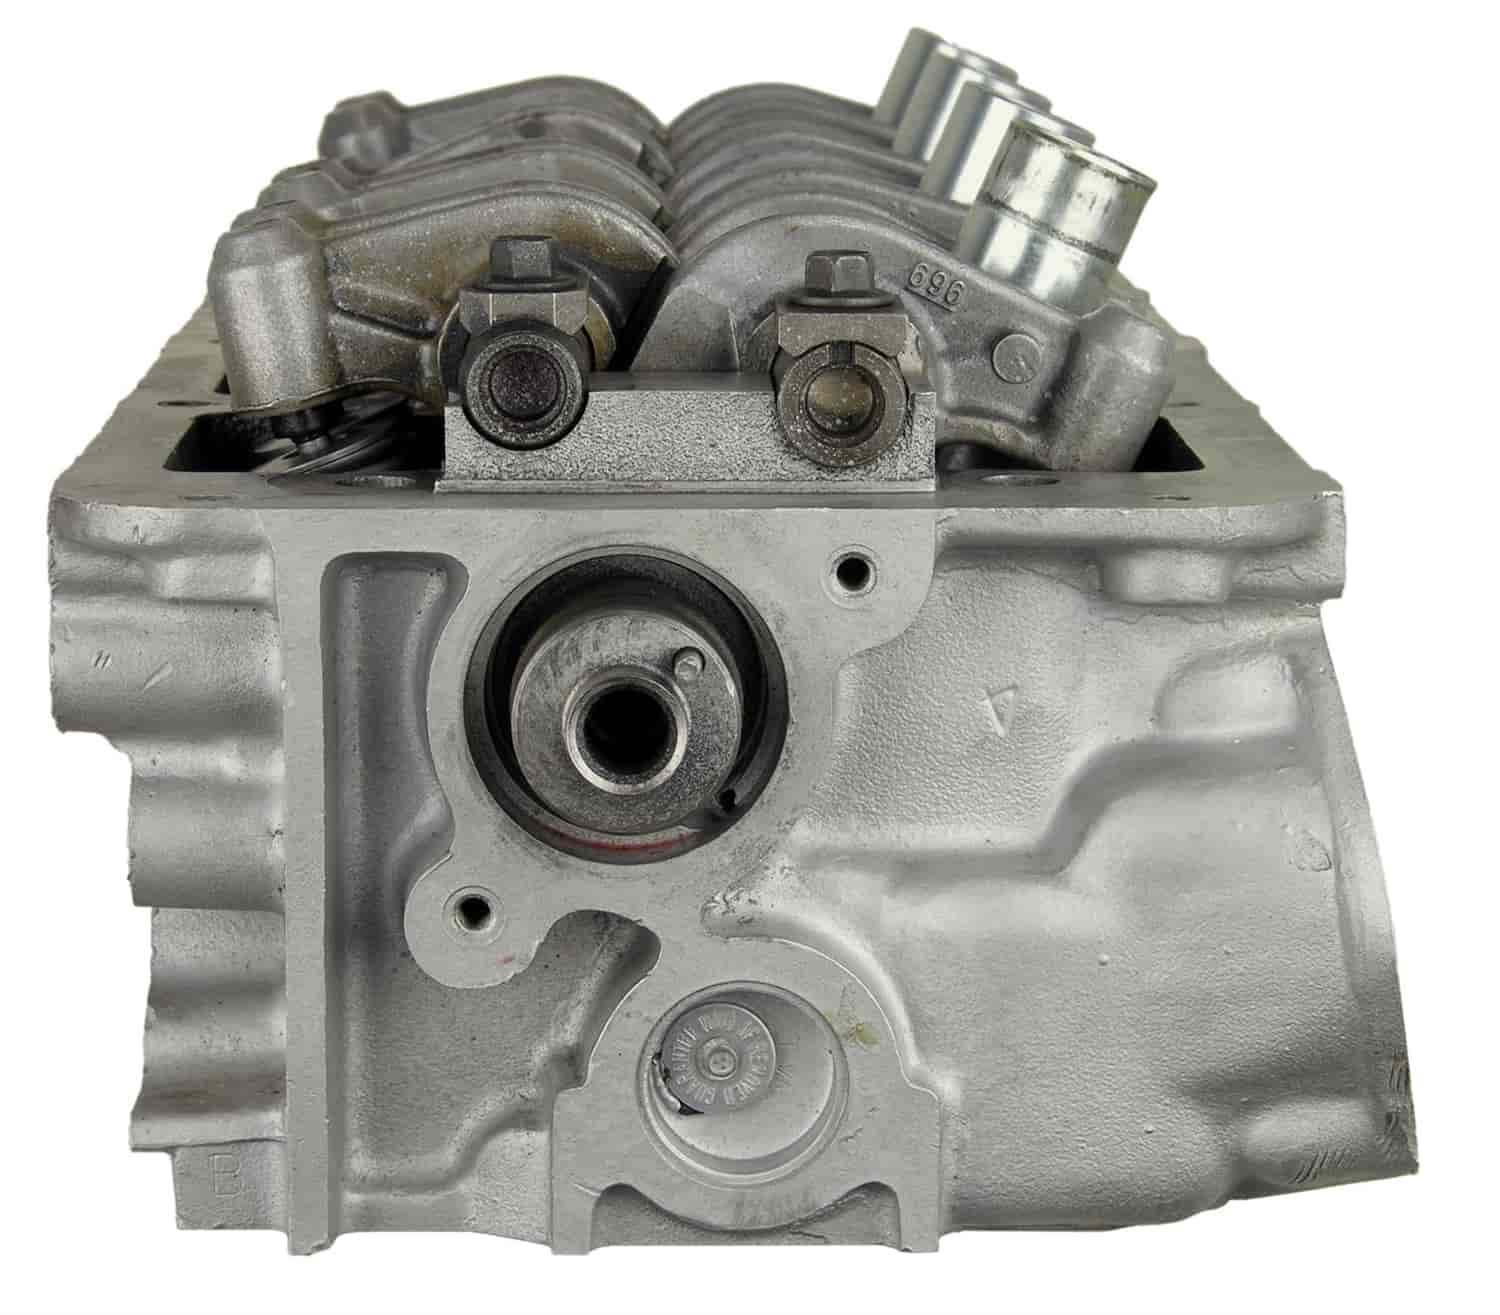 Remanufactured Cylinder Head for 1995 Dodge/Plymouth with 2.0L